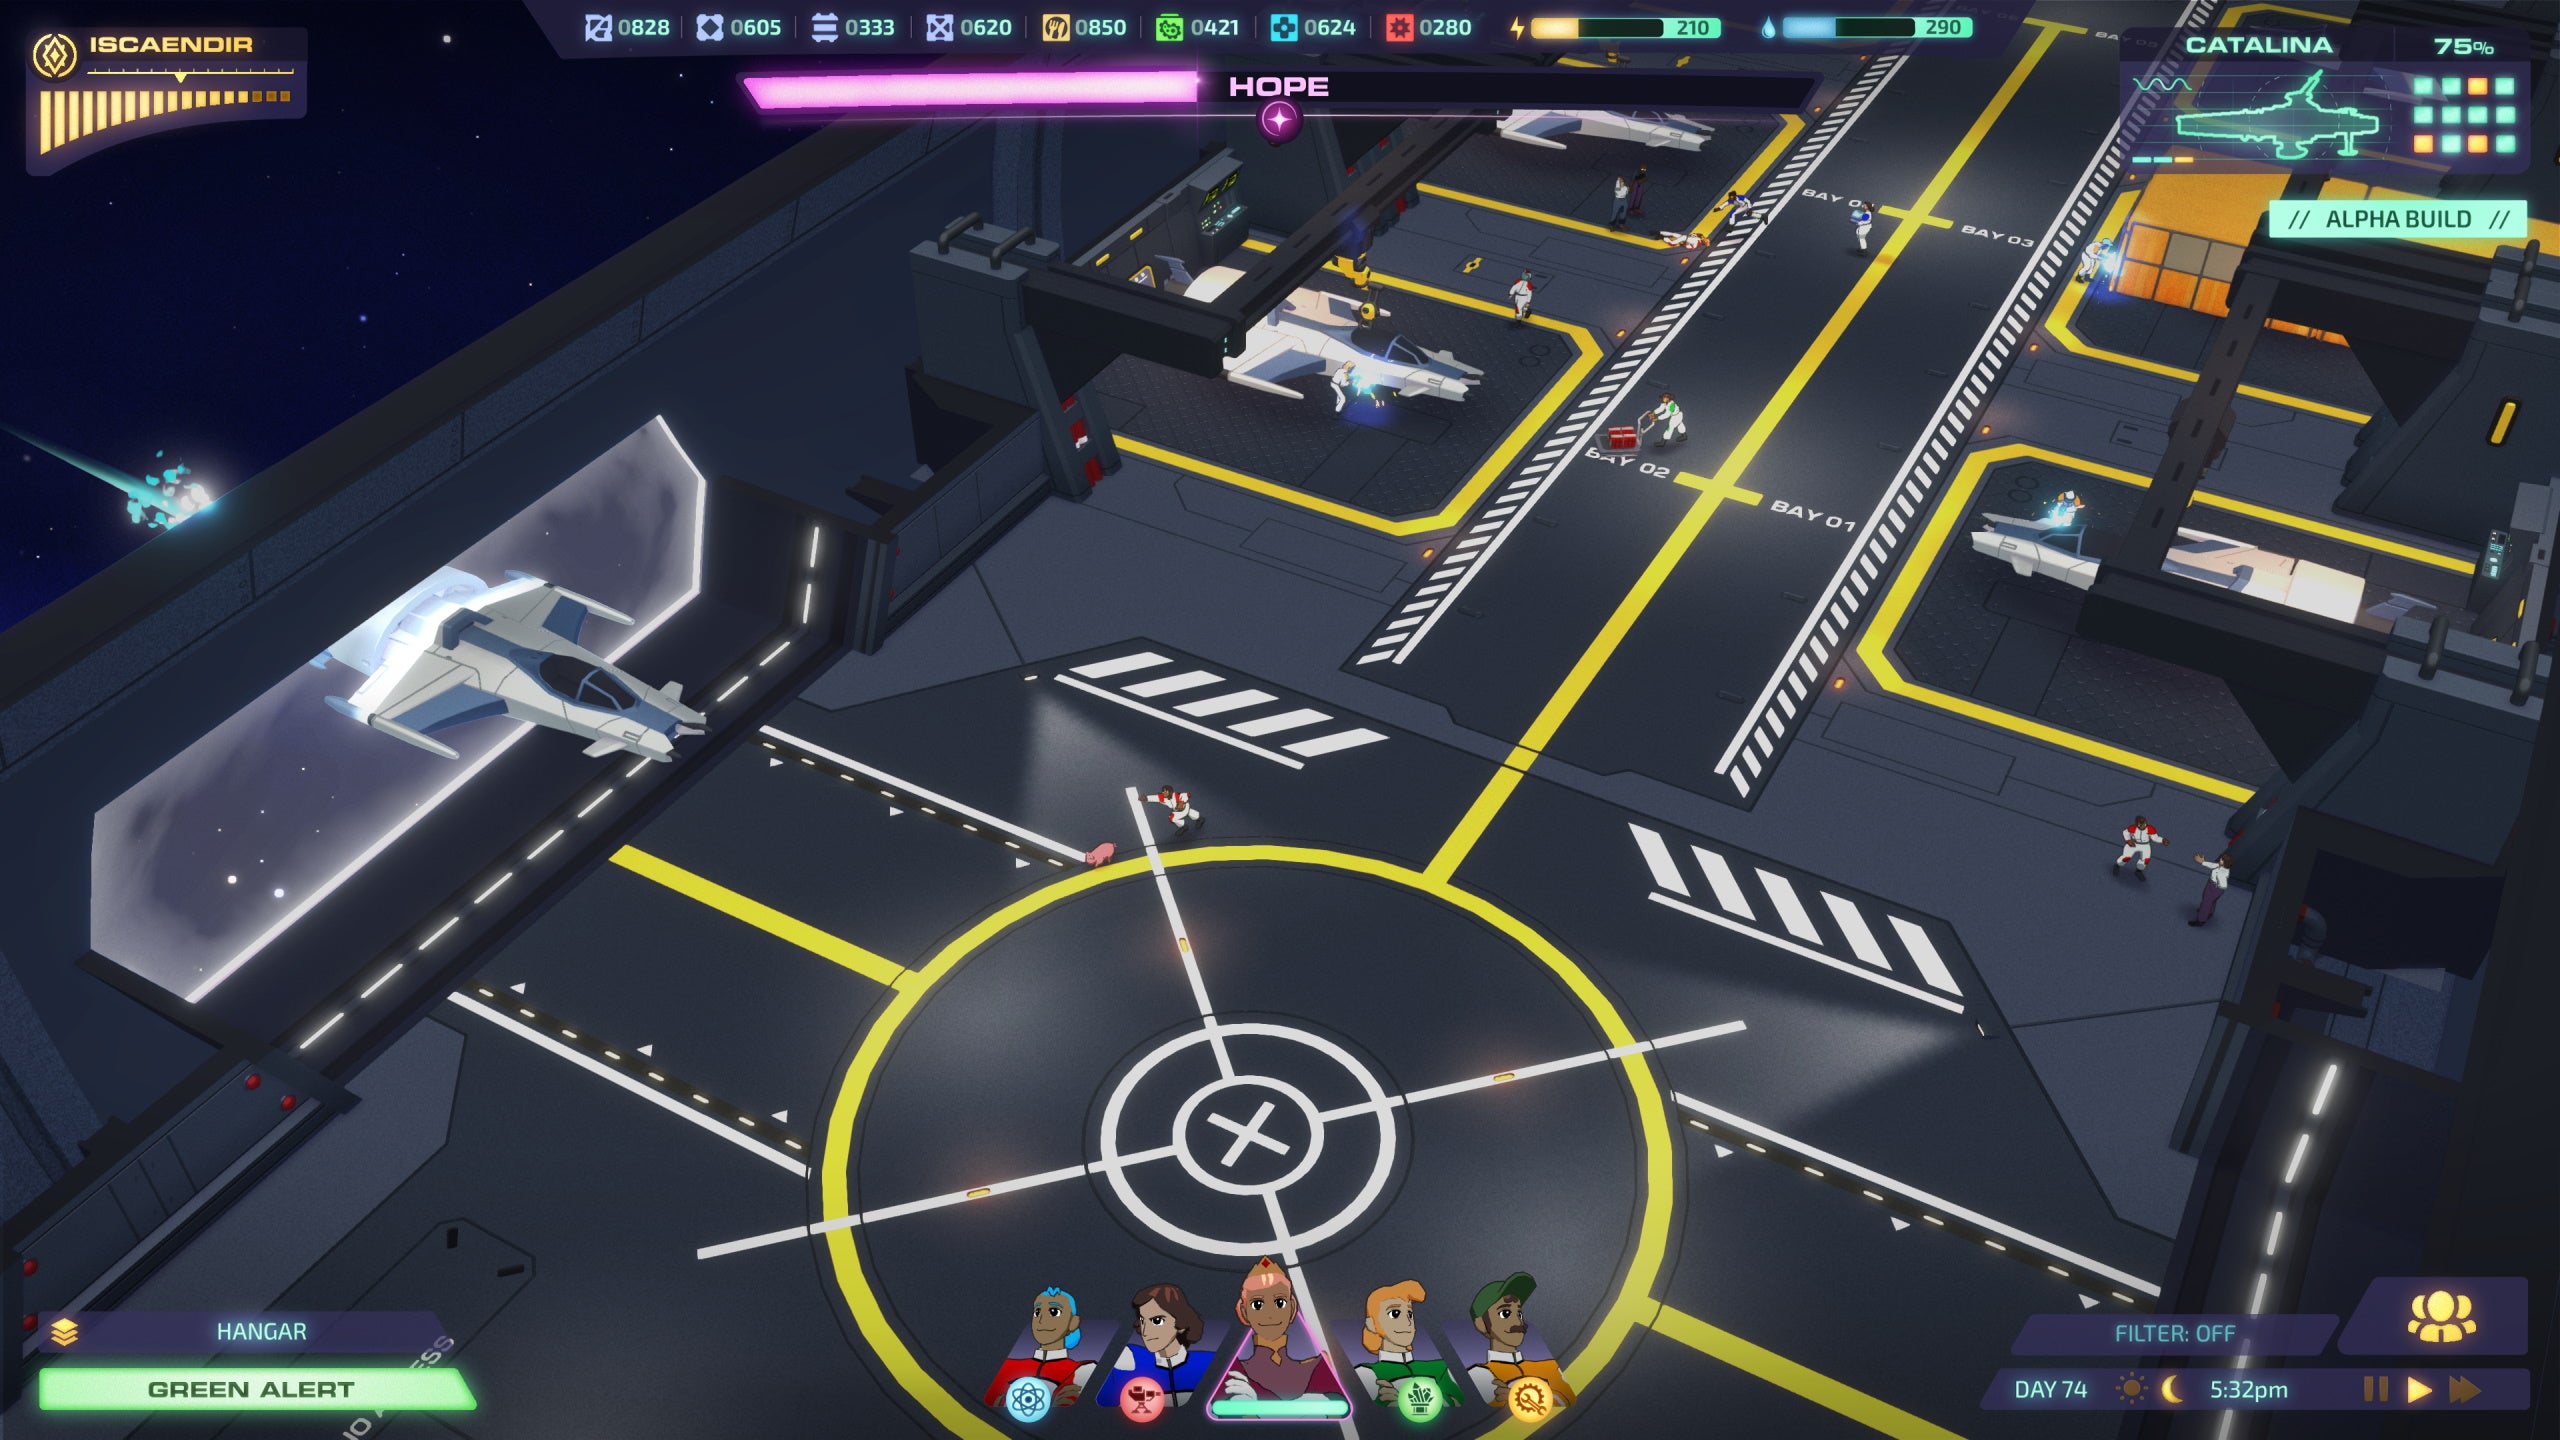 The hangar bay of a space ship in Jumplight Odyssey